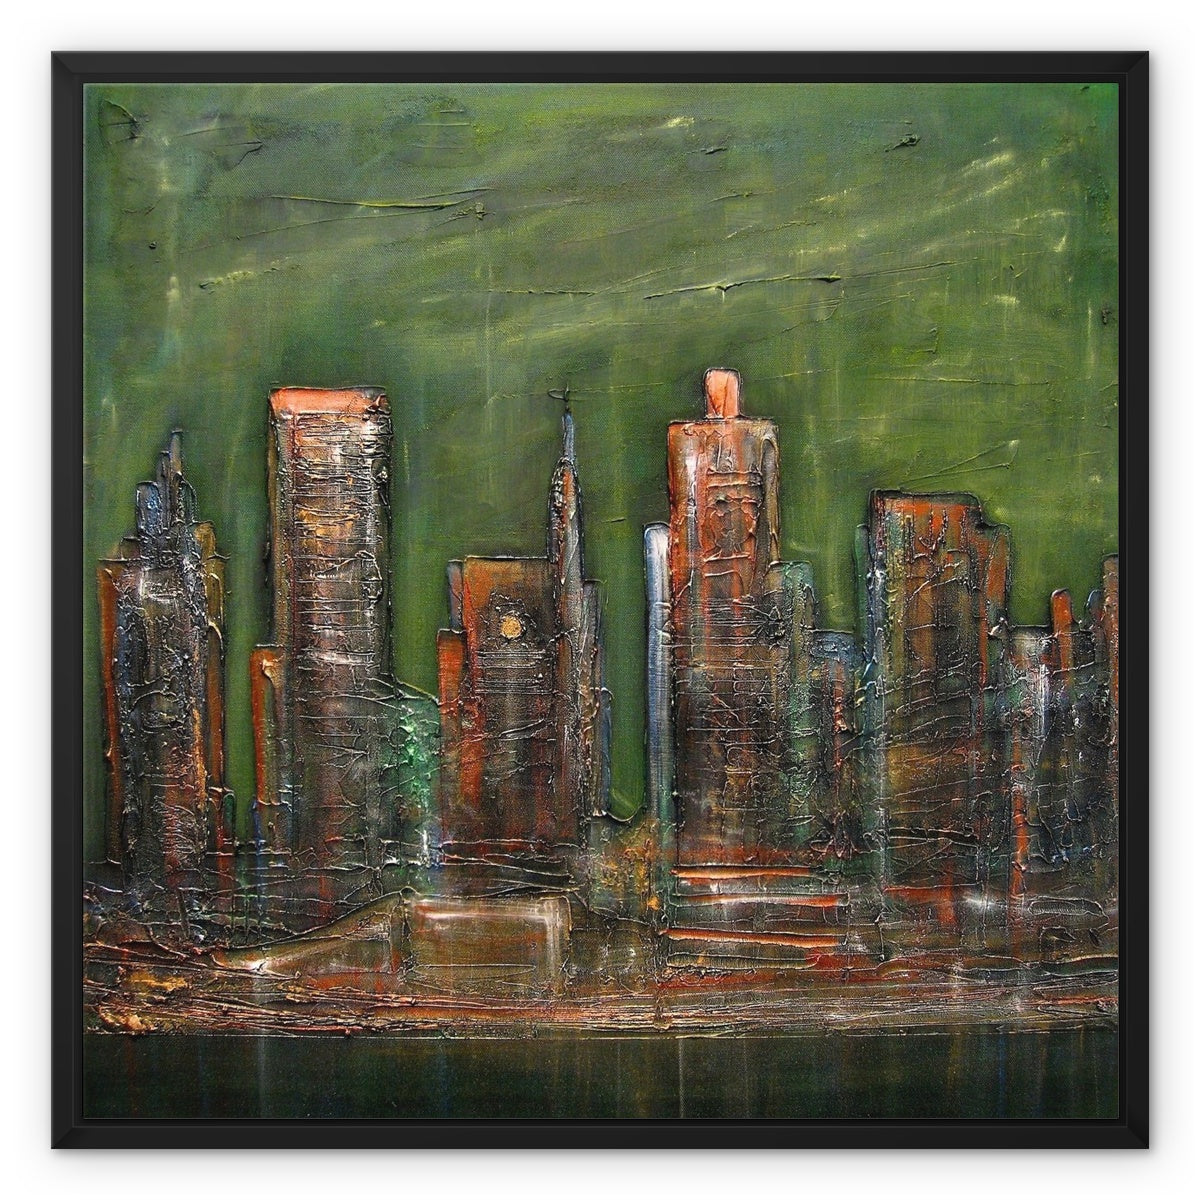 A Neon New York Painting | Framed Canvas From Scotland-Floating Framed Canvas Prints-World Art Gallery-24"x24"-Paintings, Prints, Homeware, Art Gifts From Scotland By Scottish Artist Kevin Hunter